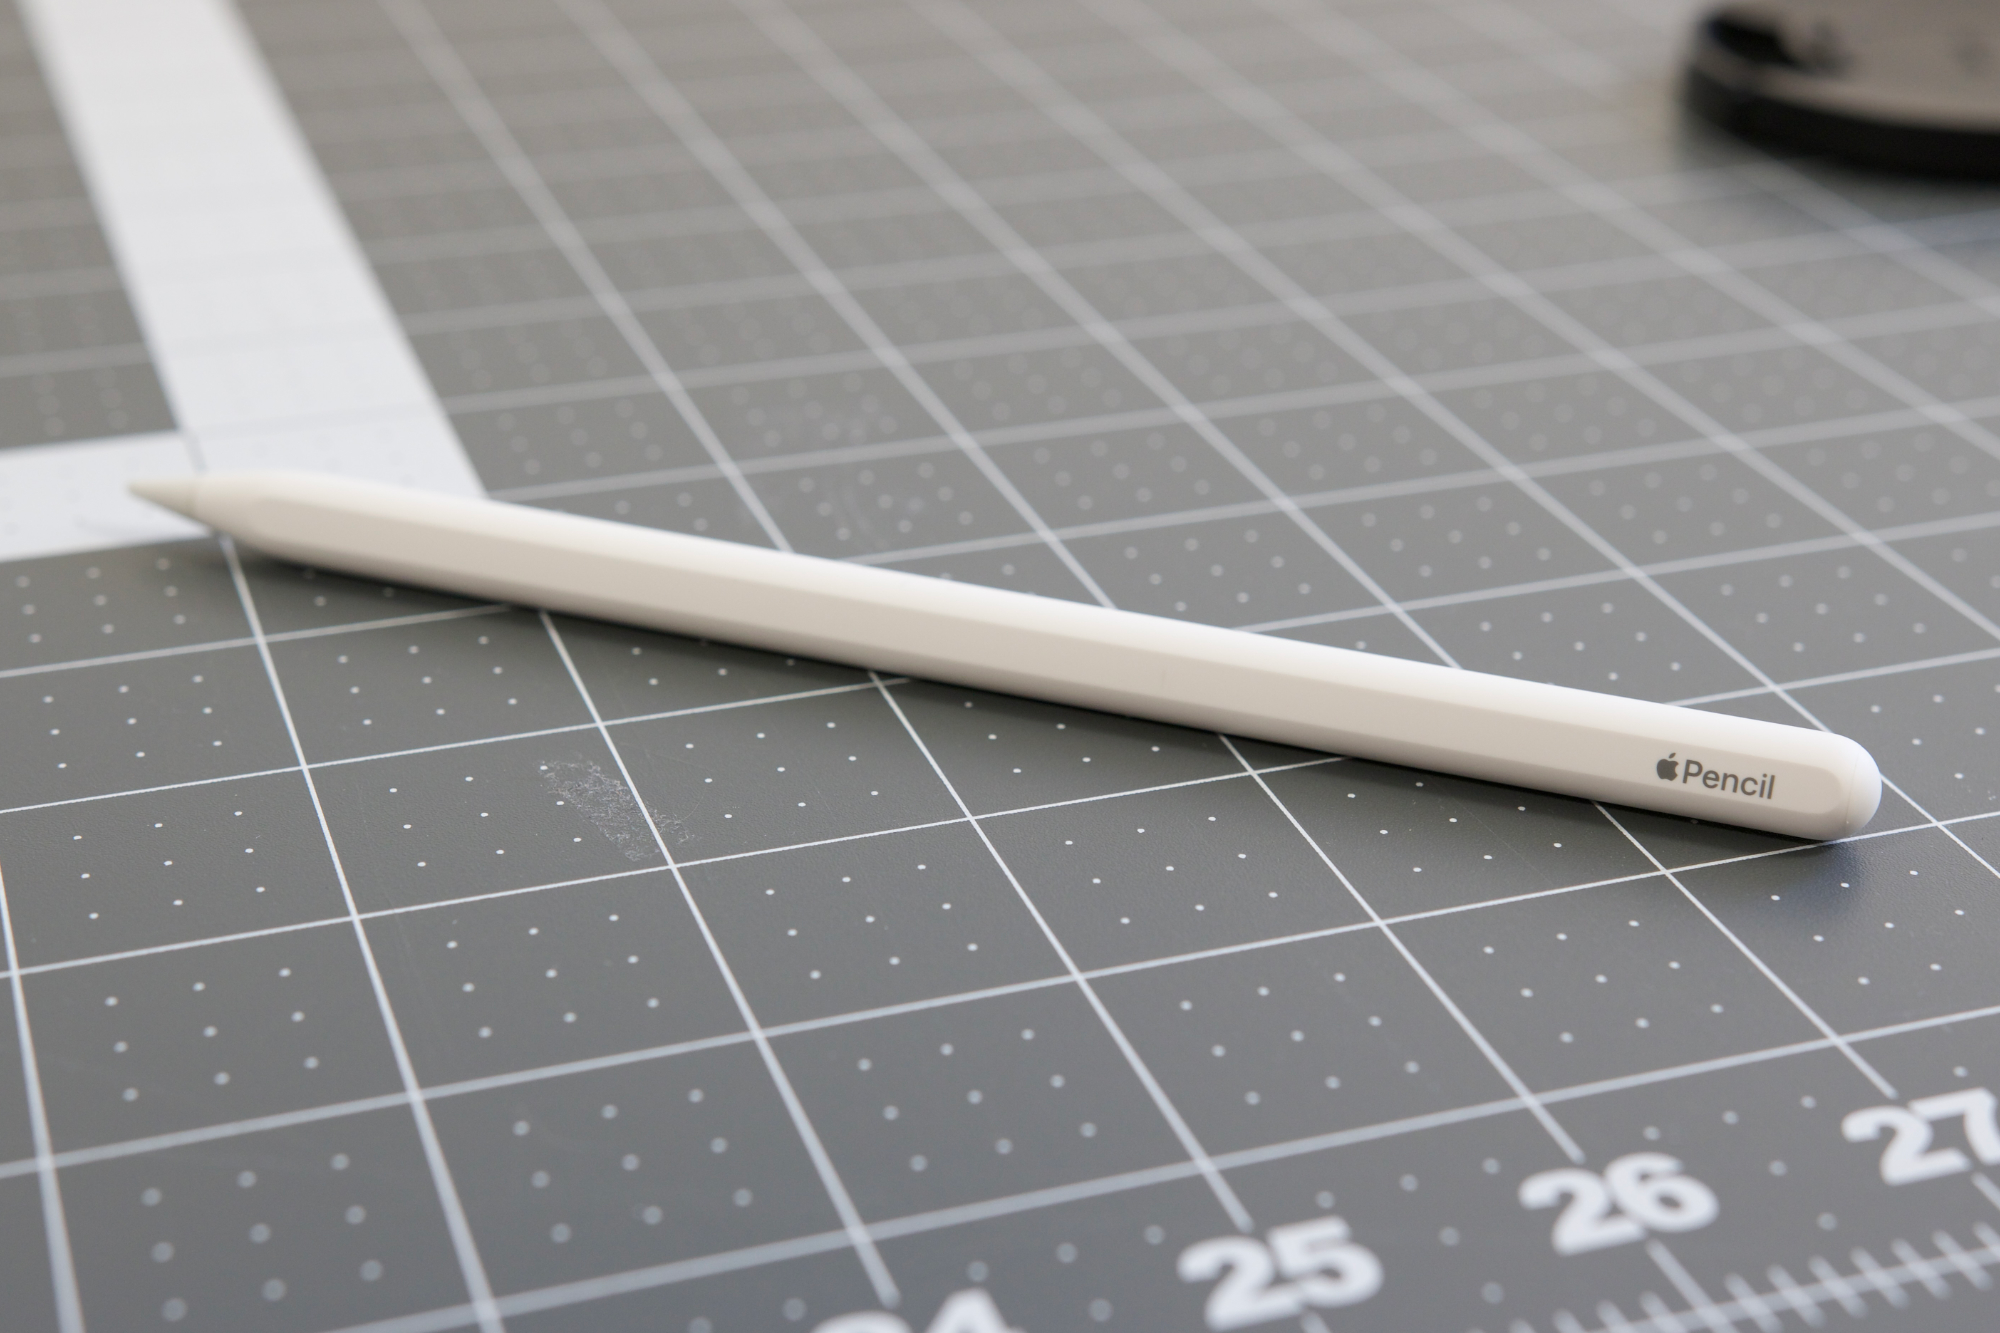 The 2nd gen Apple Pencil laying on a table